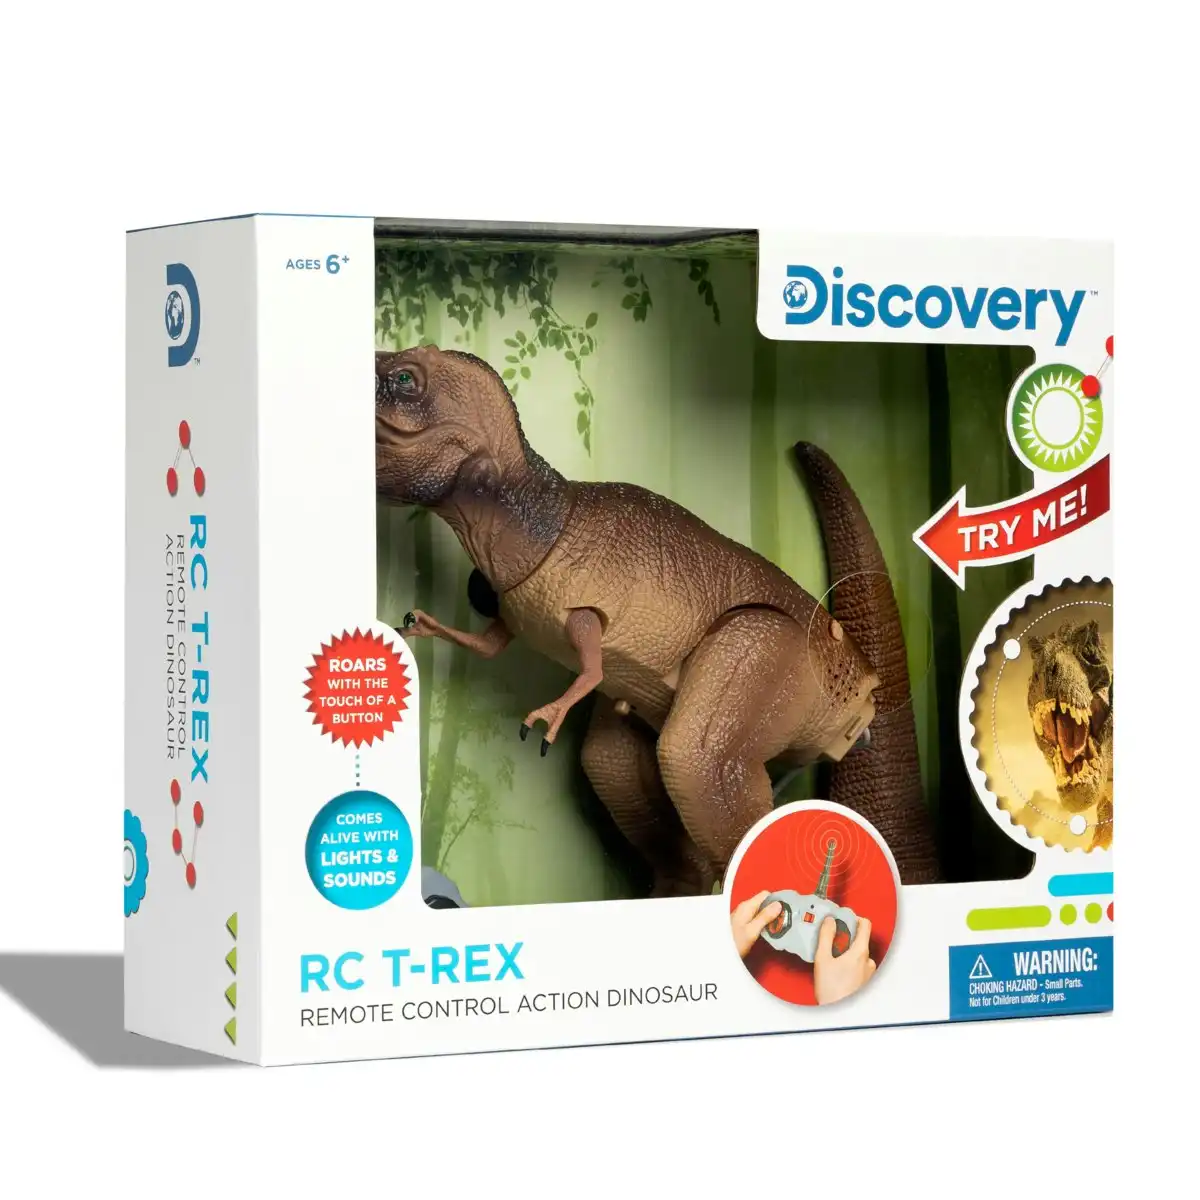 Discovery Rc T-rex Remote Control Dinosaur